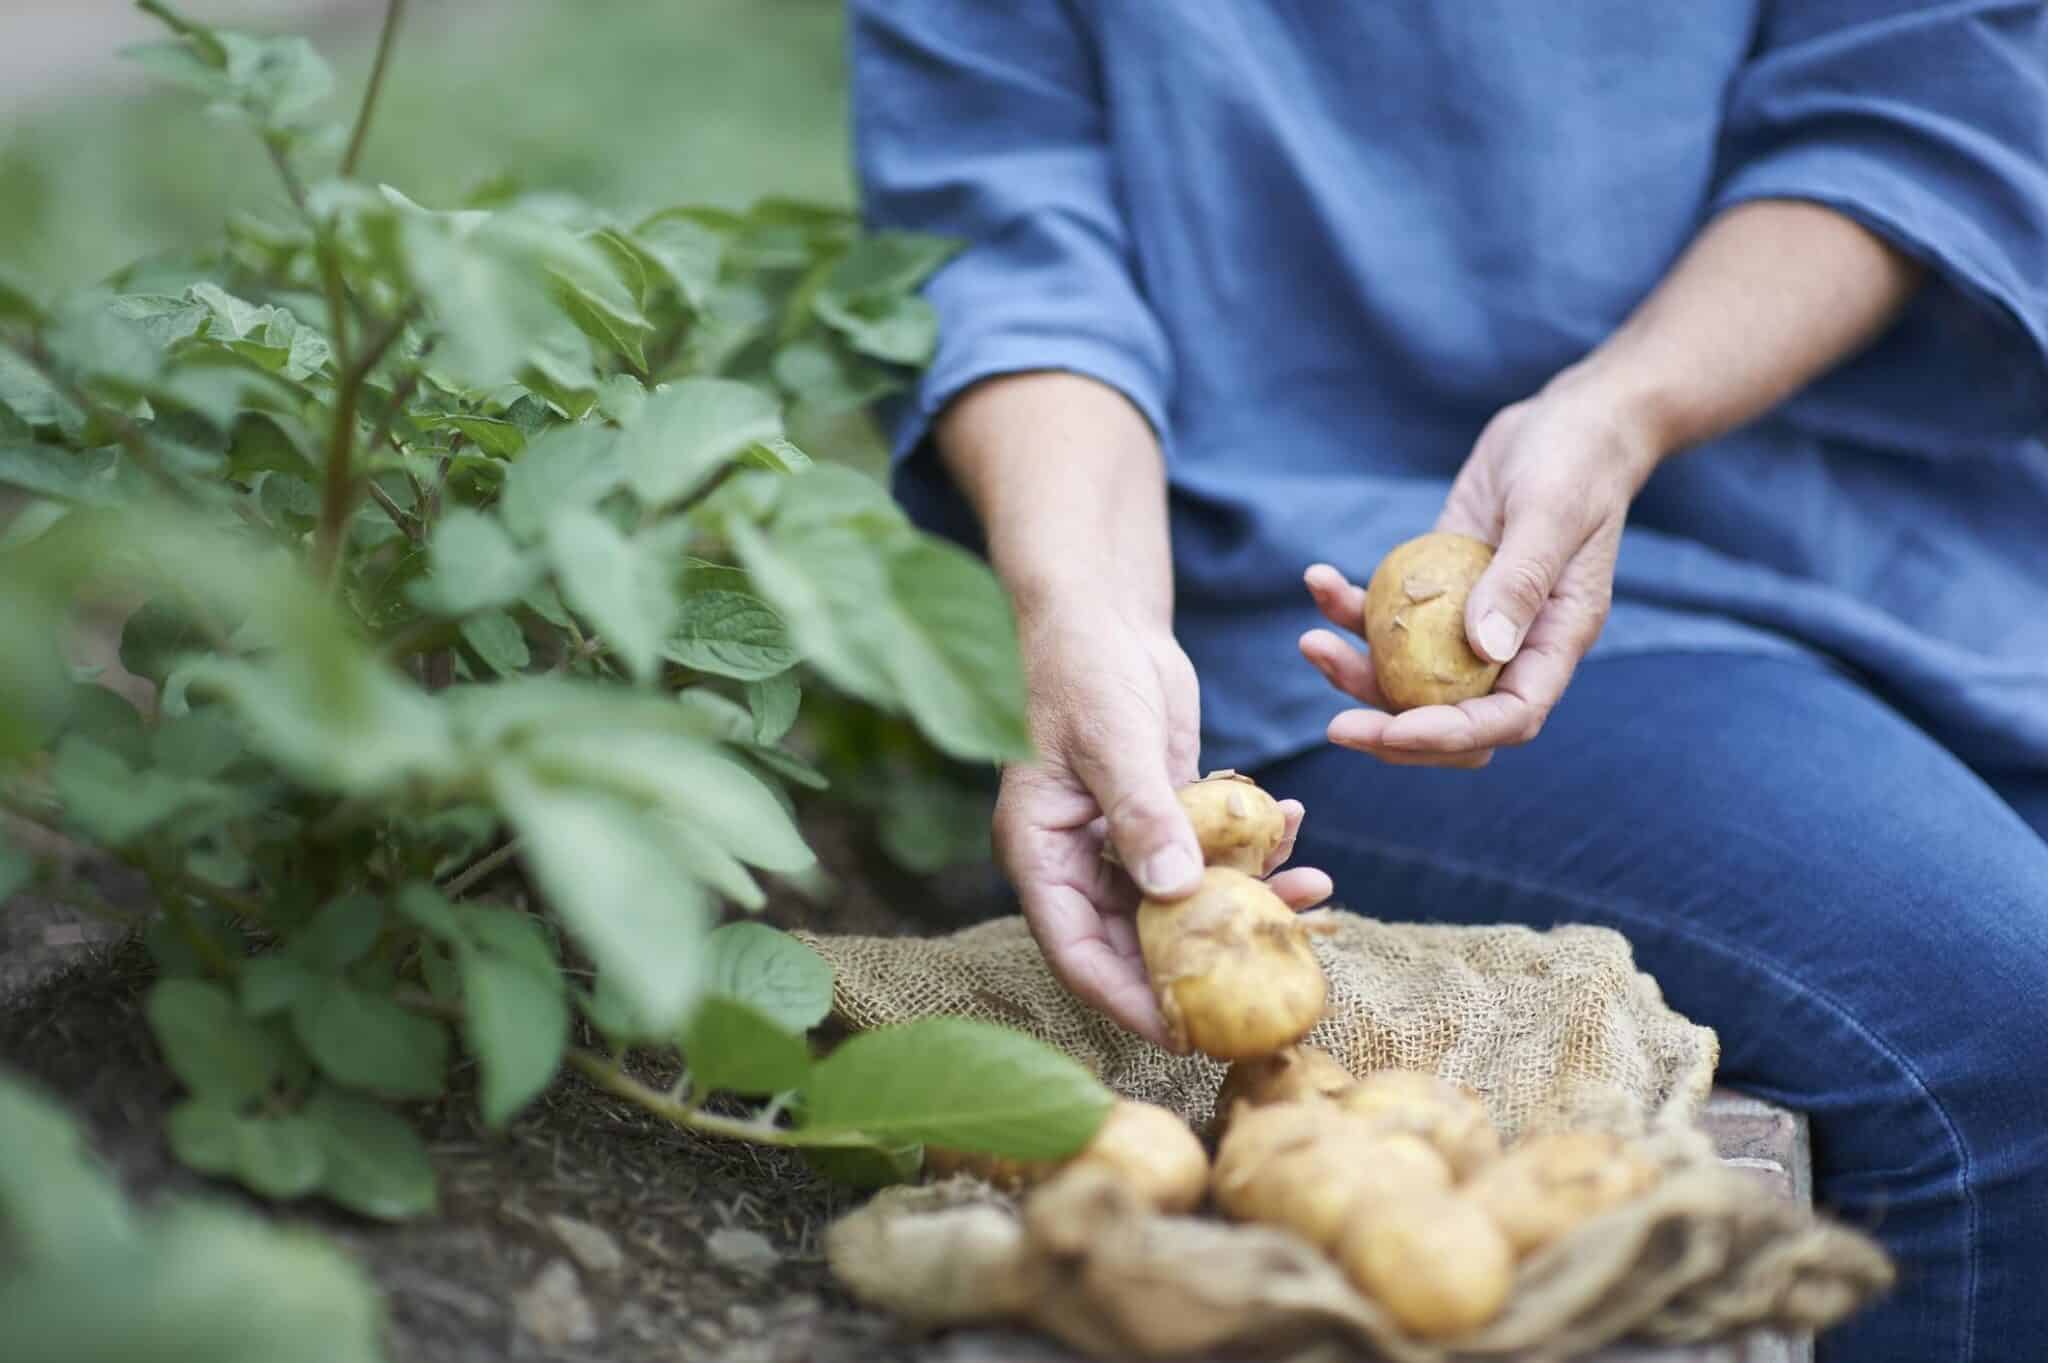 Woman gathering potatoes from vegetable patch